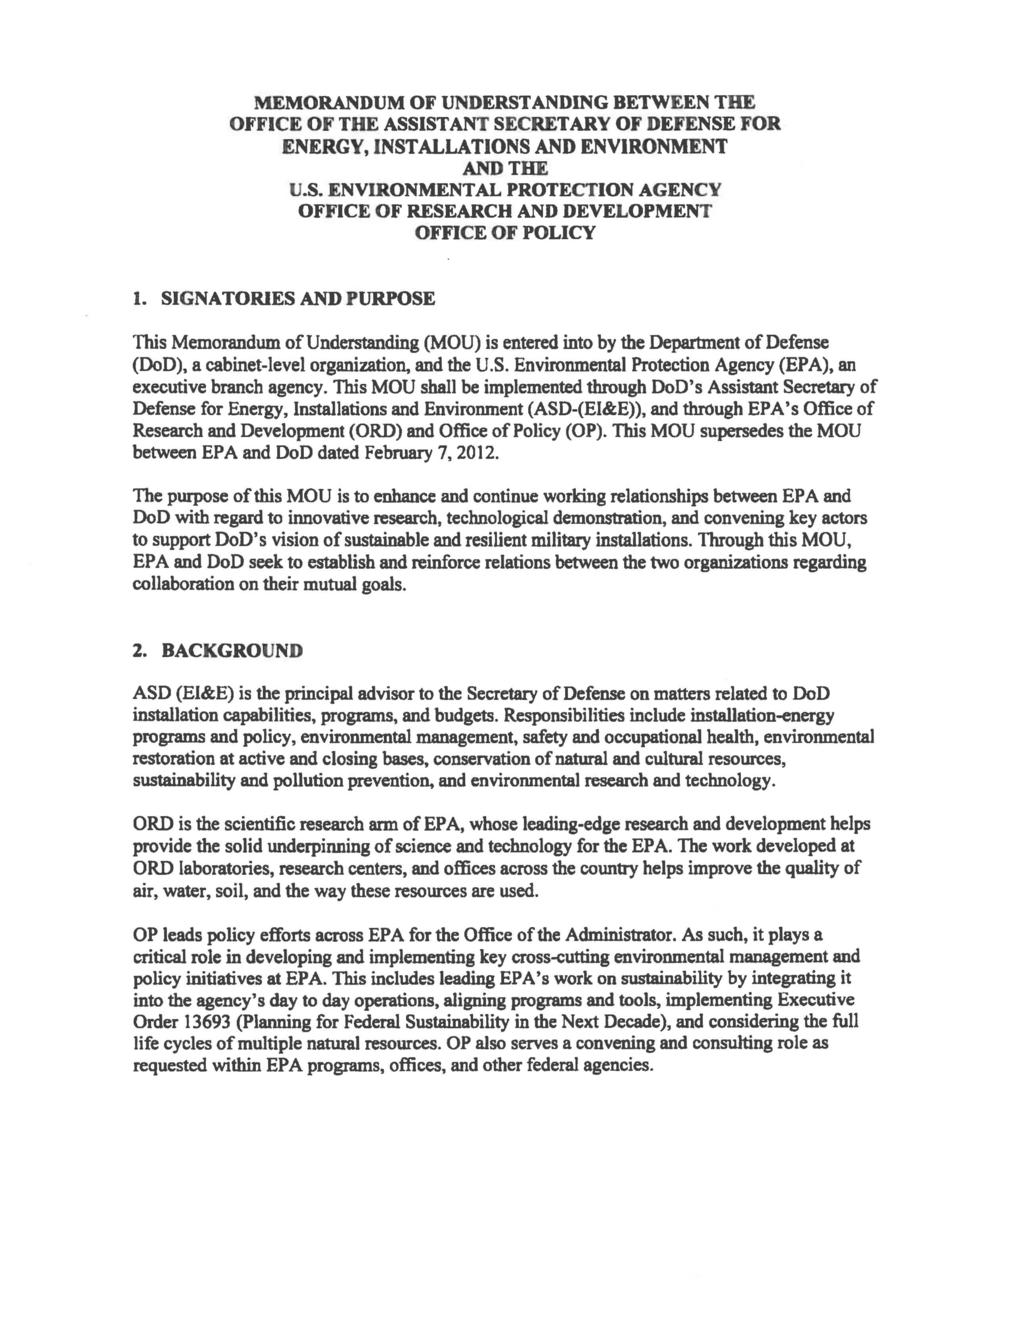 MEMORANDUM OF UNDERSTANDING BETWEEN THE OFFICE OF THE ASSIST ANT SECRETARY OF DEFENSE FOR ENERGY, INSTALLATIONS AND ENVIRONMENT AND THE U.S. ENVIRONMENTAL PROTECTION AGENCY OFFICE OF RESEARCH AND DEVELOPMENT OFFICE OF POLICY 1.